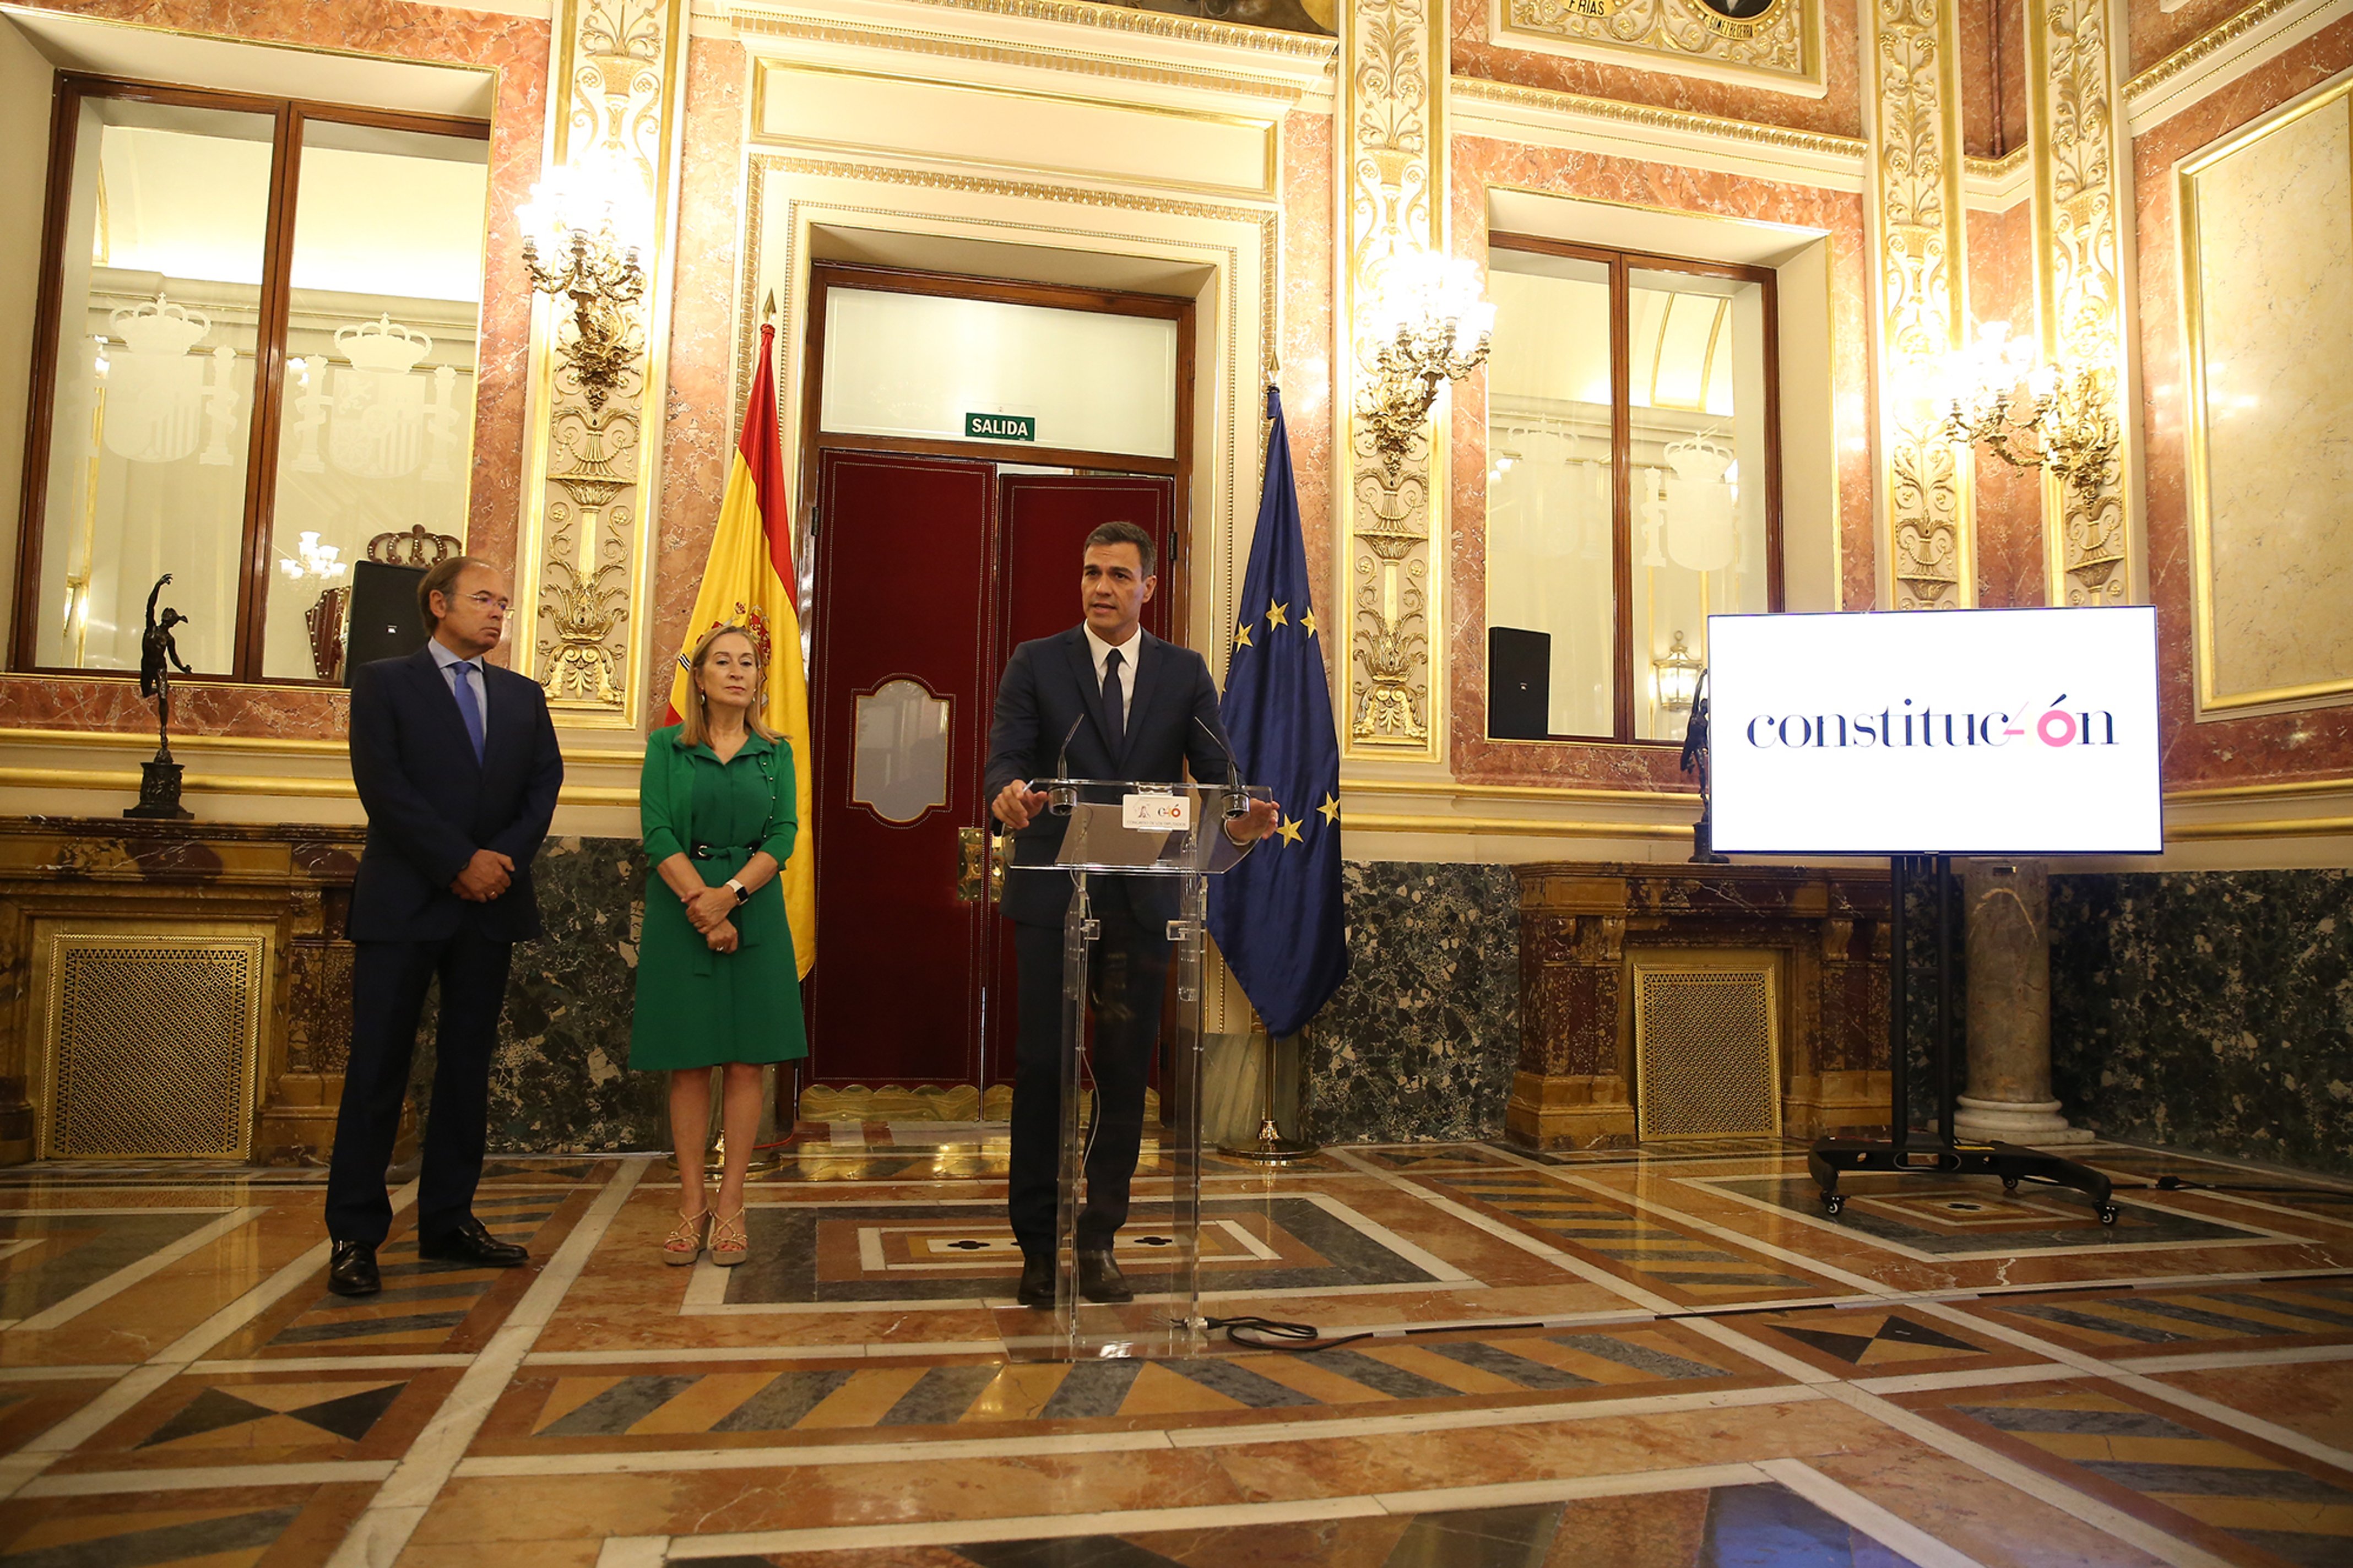 Sánchez: "The Spanish Constitution allows for options for new agreements to be explored"